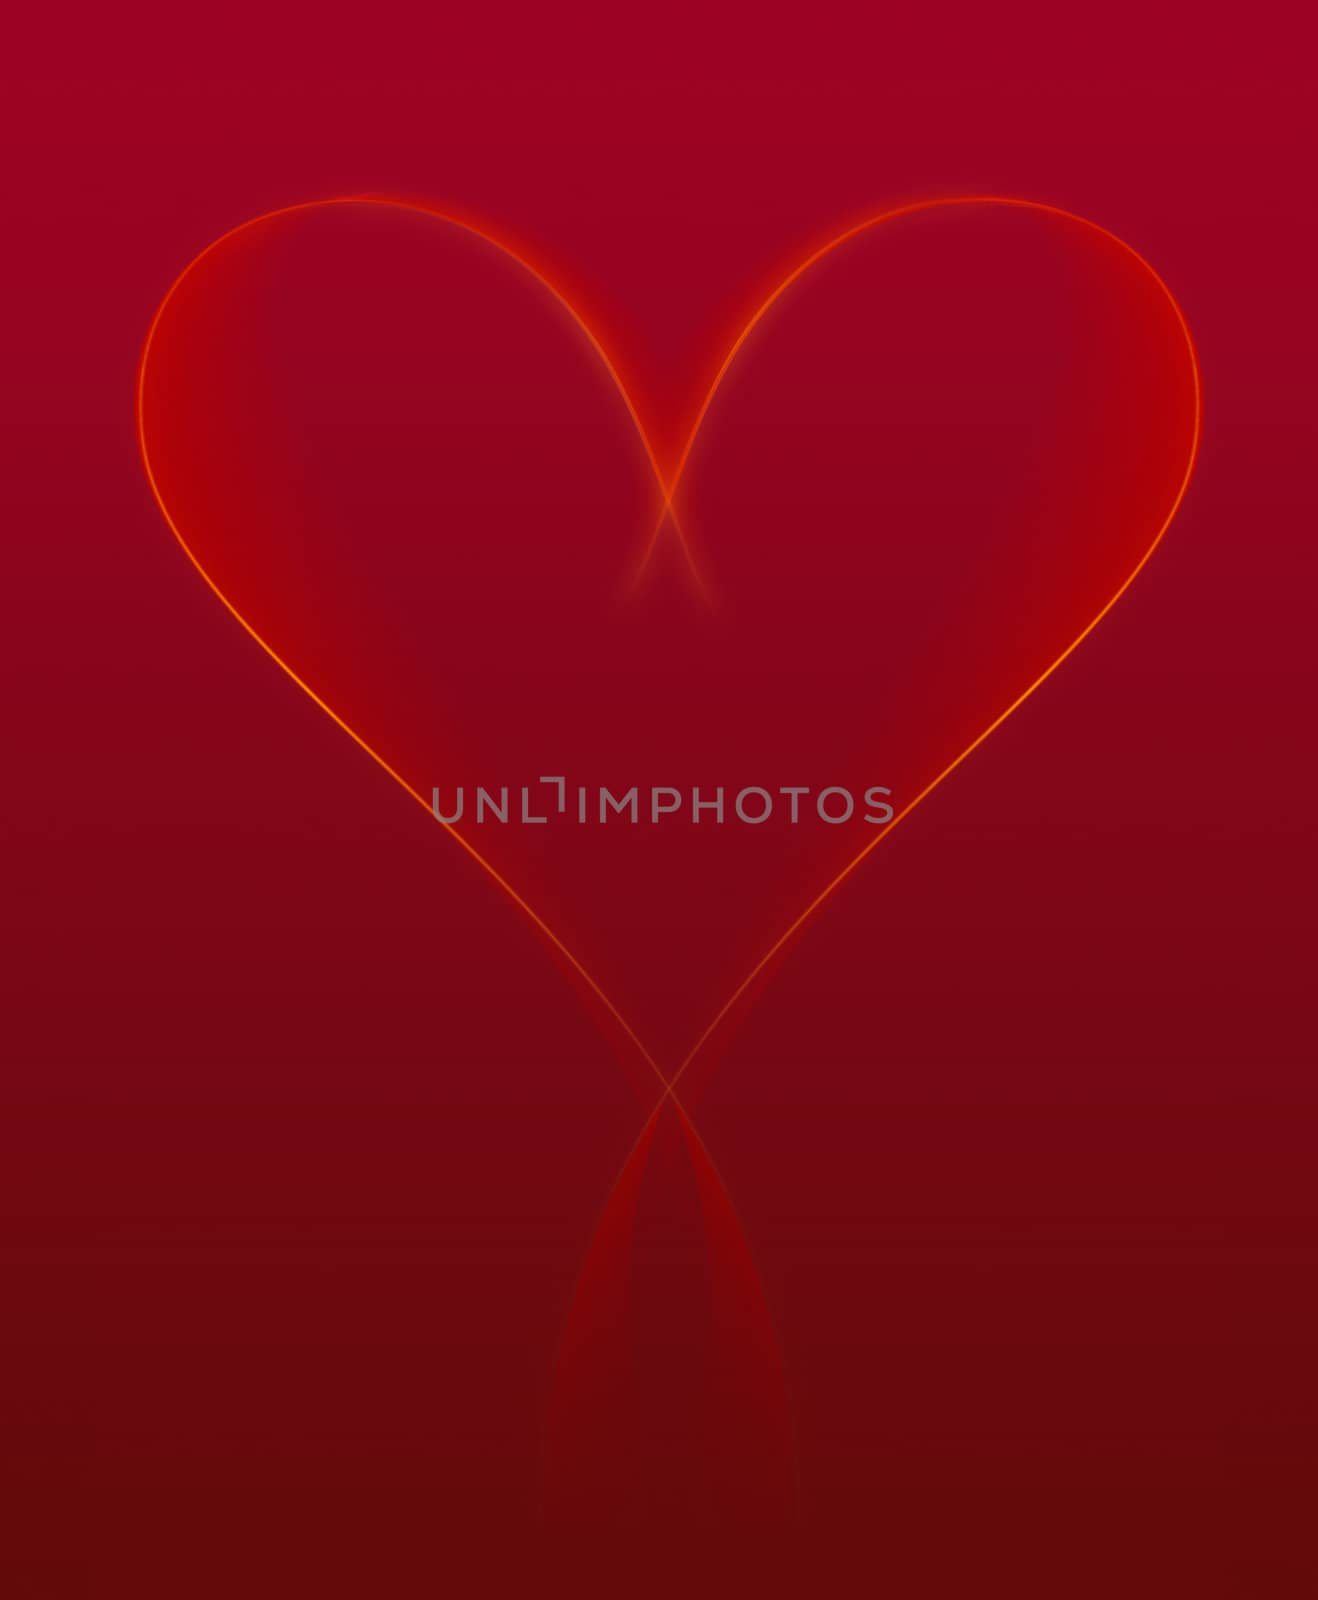 Deep red background with a glowing ribbon of light tracing out the shape of a heart